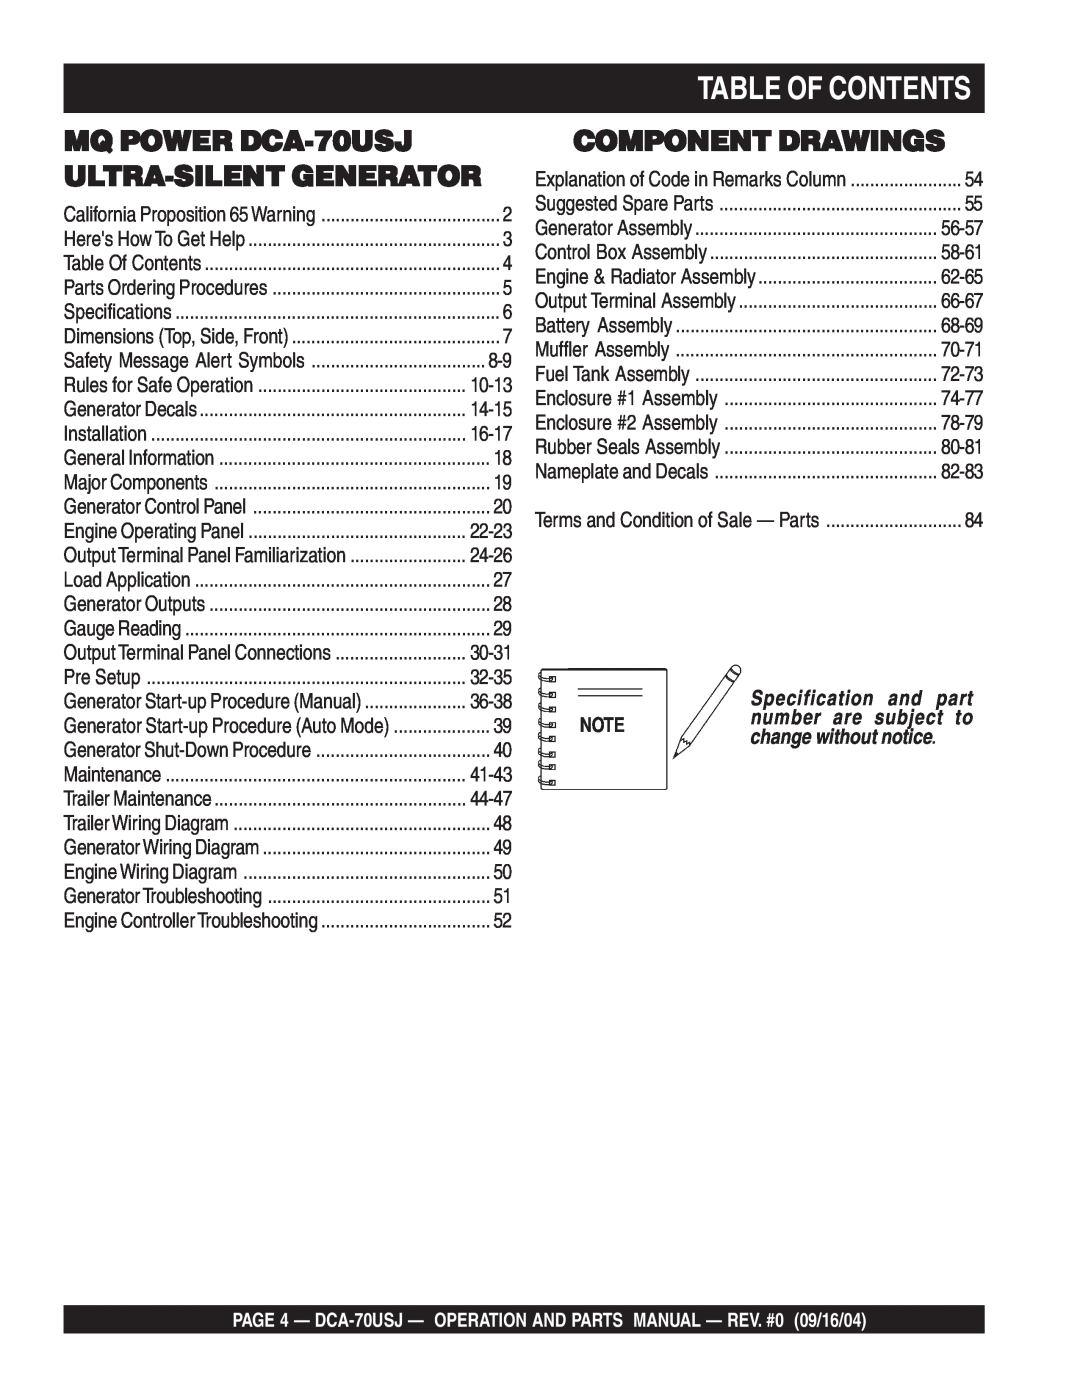 Multiquip dca-70usj operation manual Table Of Contents, MQ POWER DCA-70USJ ULTRA-SILENTGENERATOR, Component Drawings 